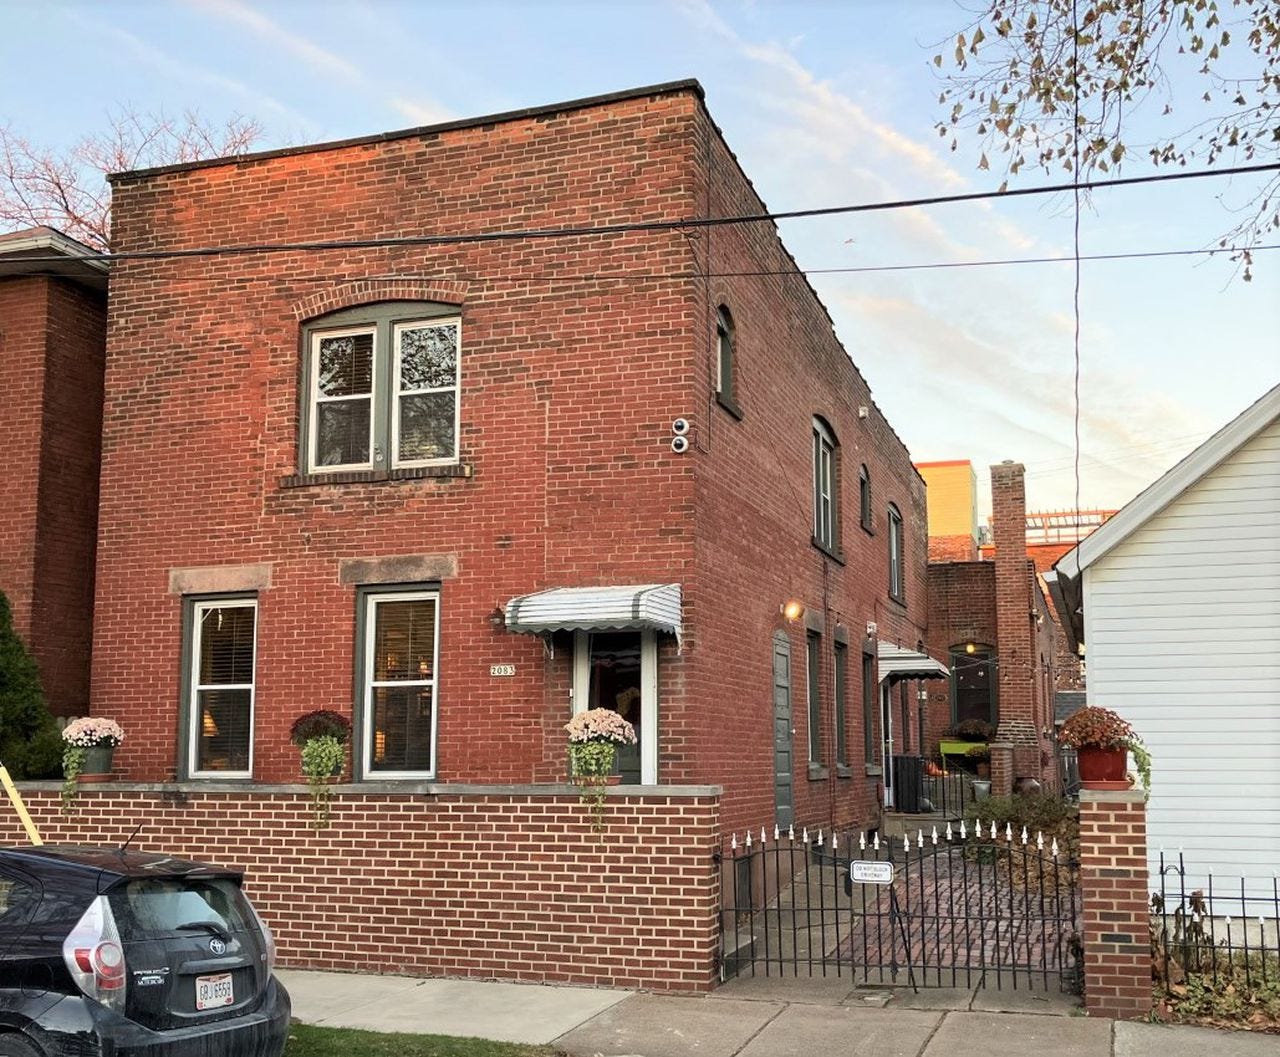 Over the last 165 years, a home owned by Tim Del Papa on West 26th Street near the heart of Cleveland's Ohio City has served as a residence, a business, an art gallery -- and a temple for contacting spirits.